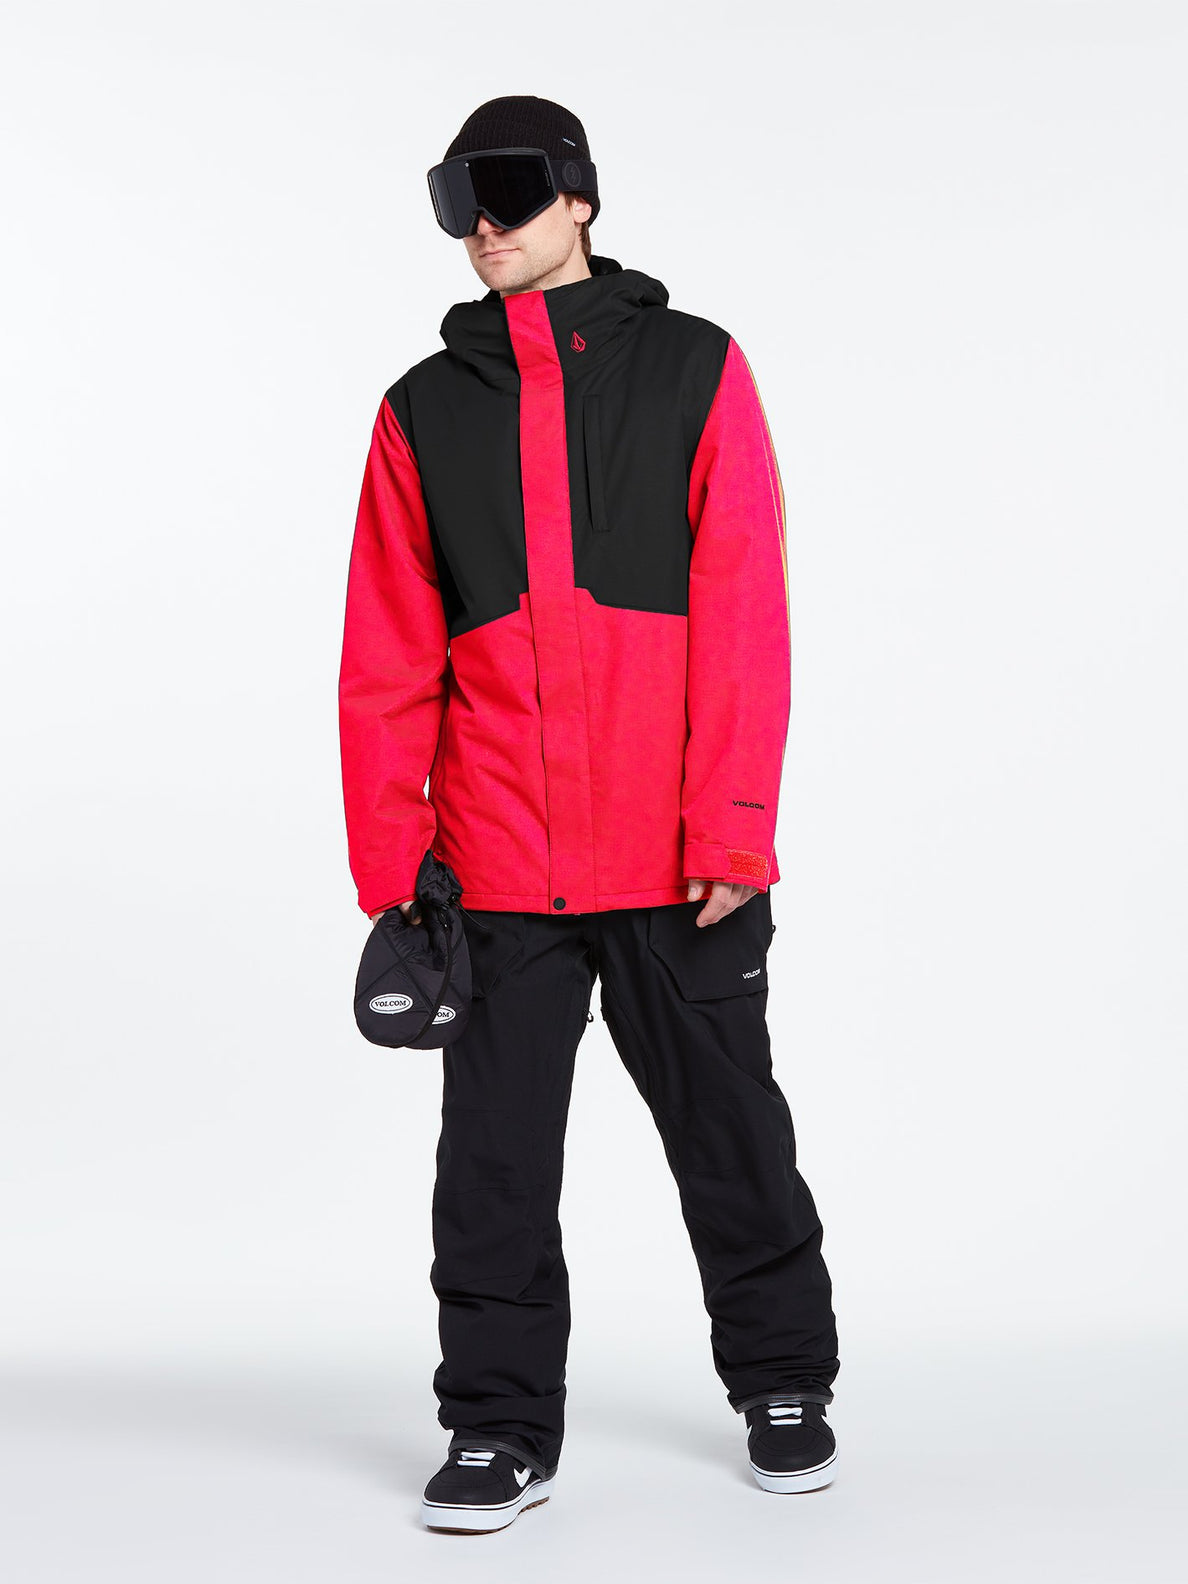 17Forty Insulated Jacket - RED COMBO (G0452114_RDC) [4]